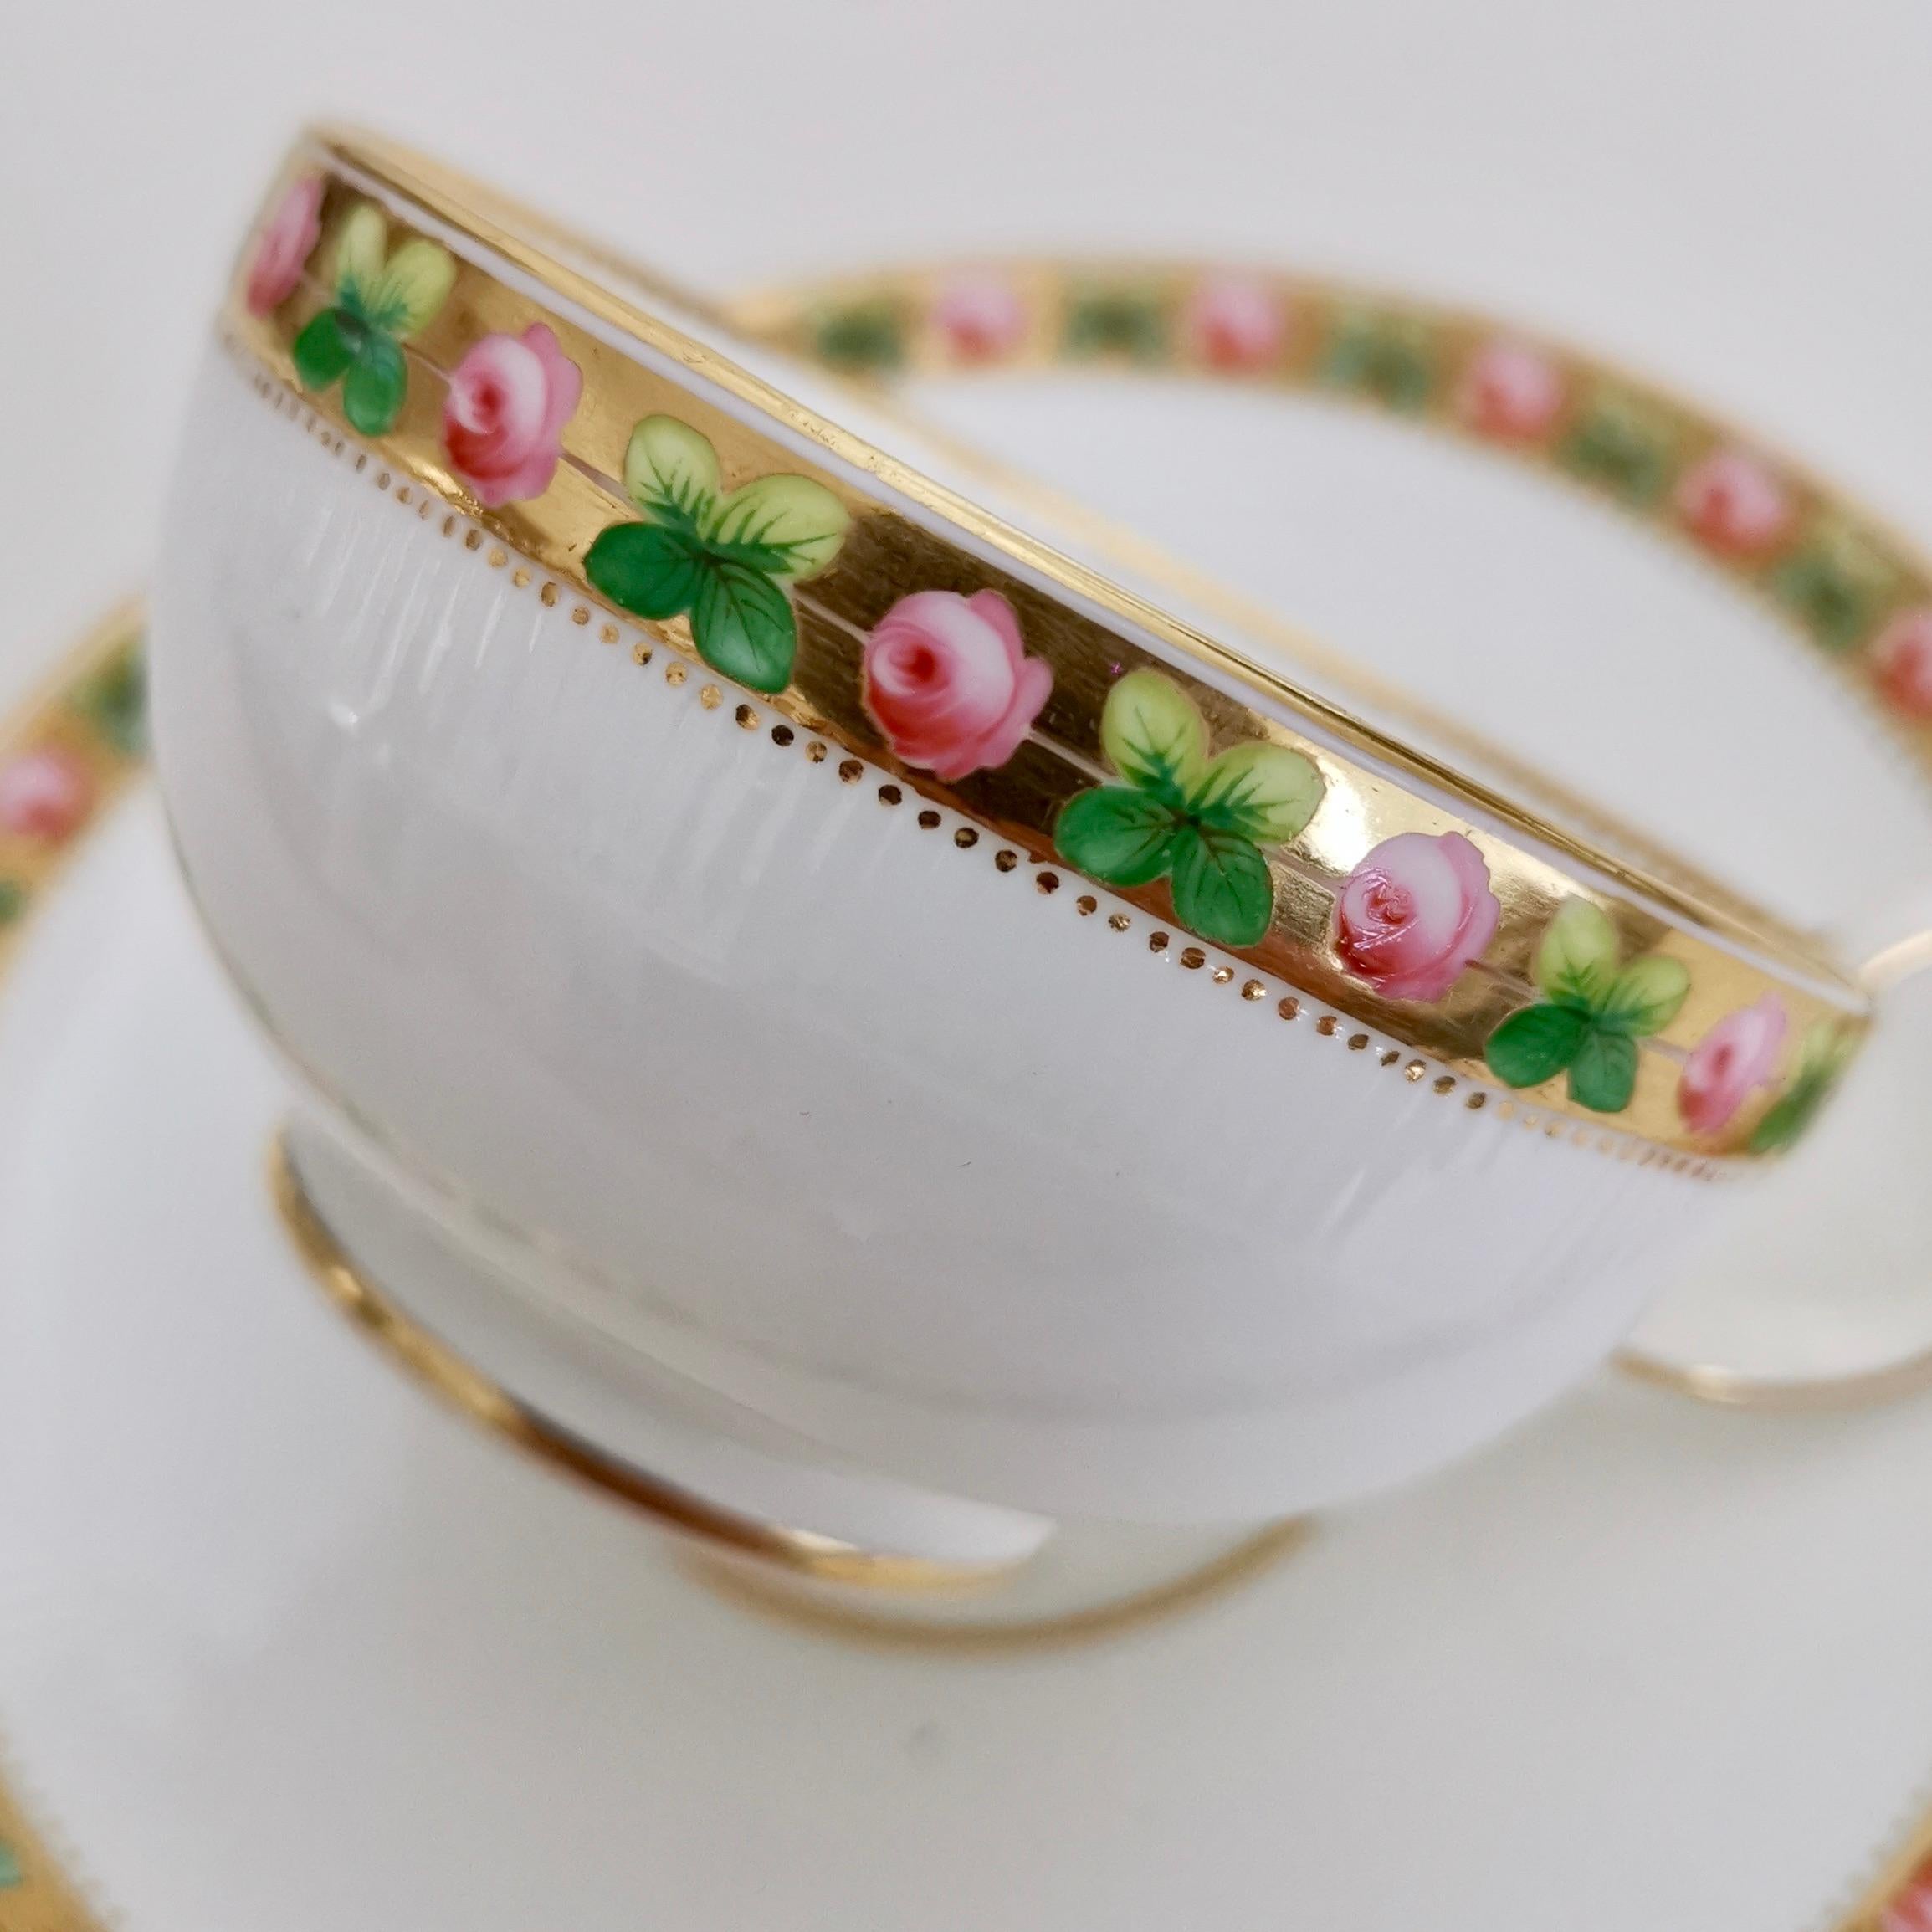 Minton Porcelain Teacup, White Paris Fluted with Roses and Gilt, 1862 1